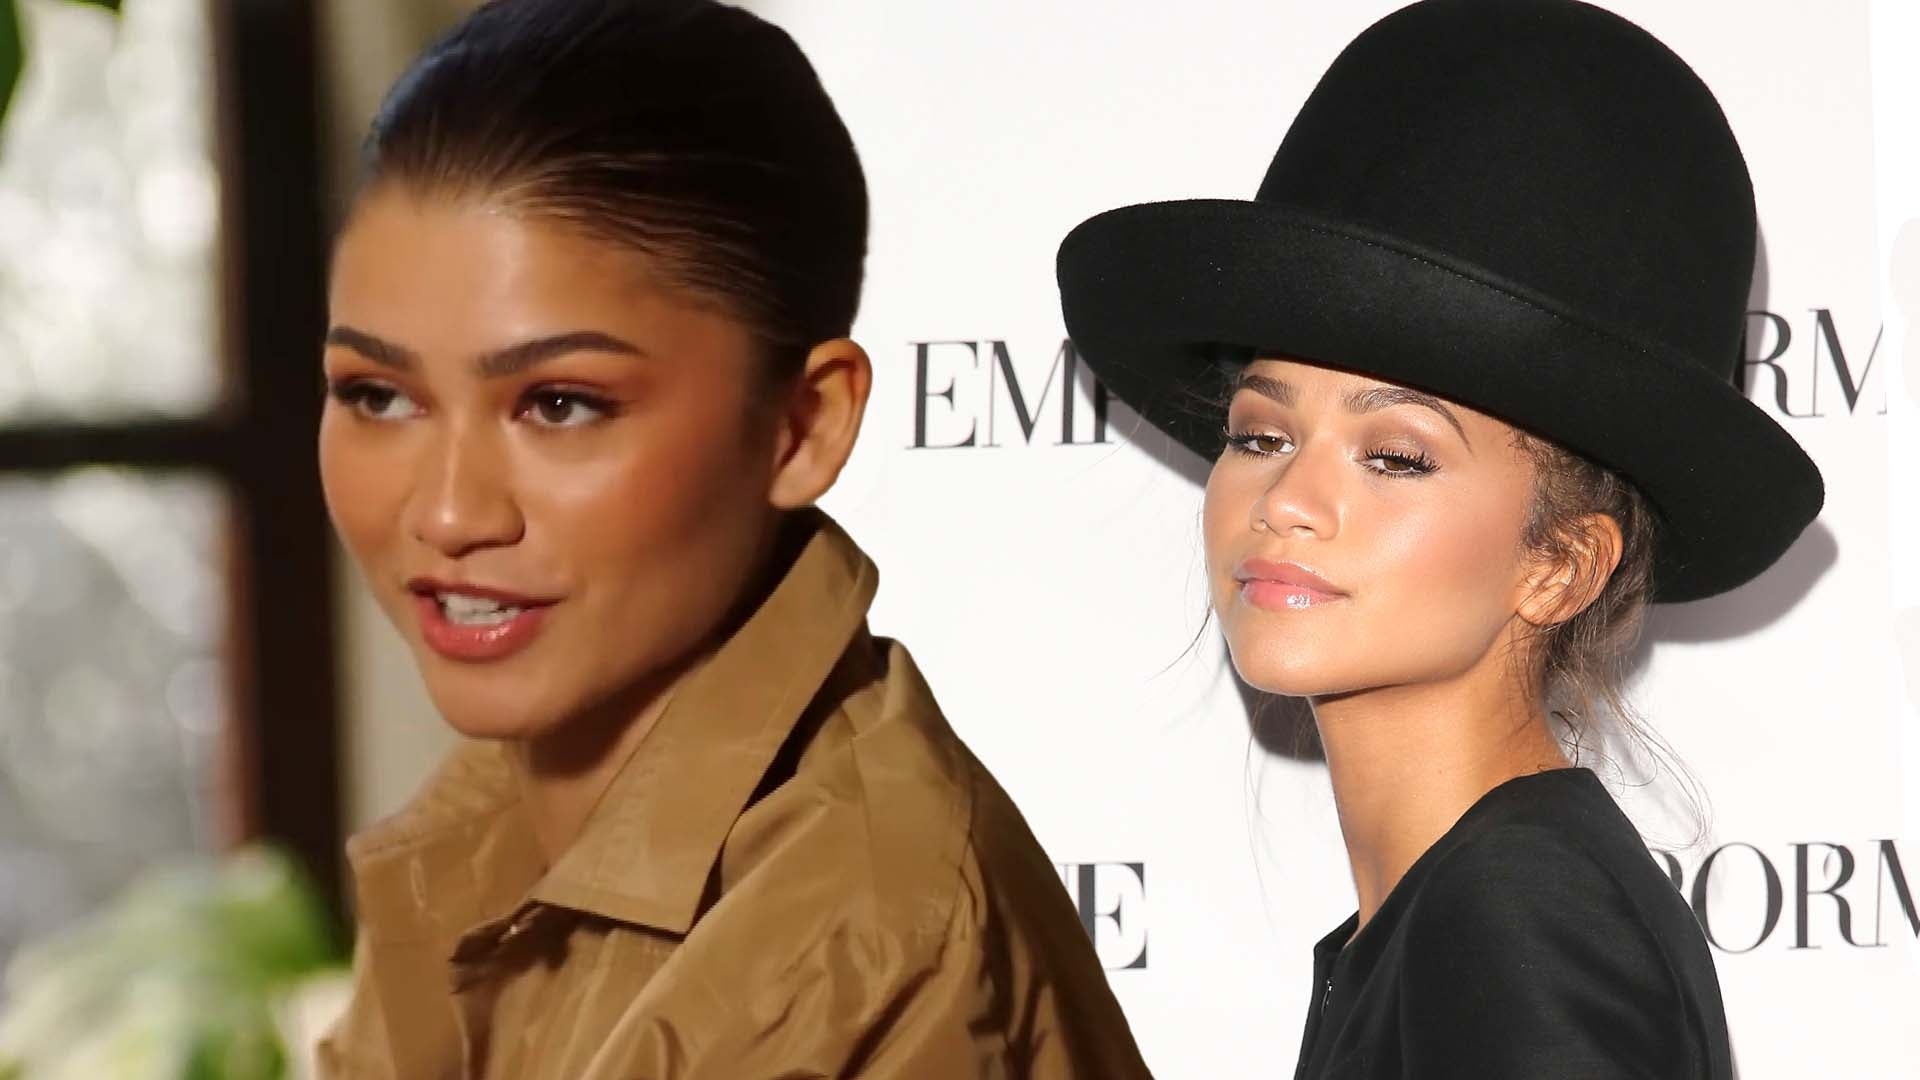 Zendaya Defends Wearing 'Controversial' Giant Hat on 2014 Red Carpet